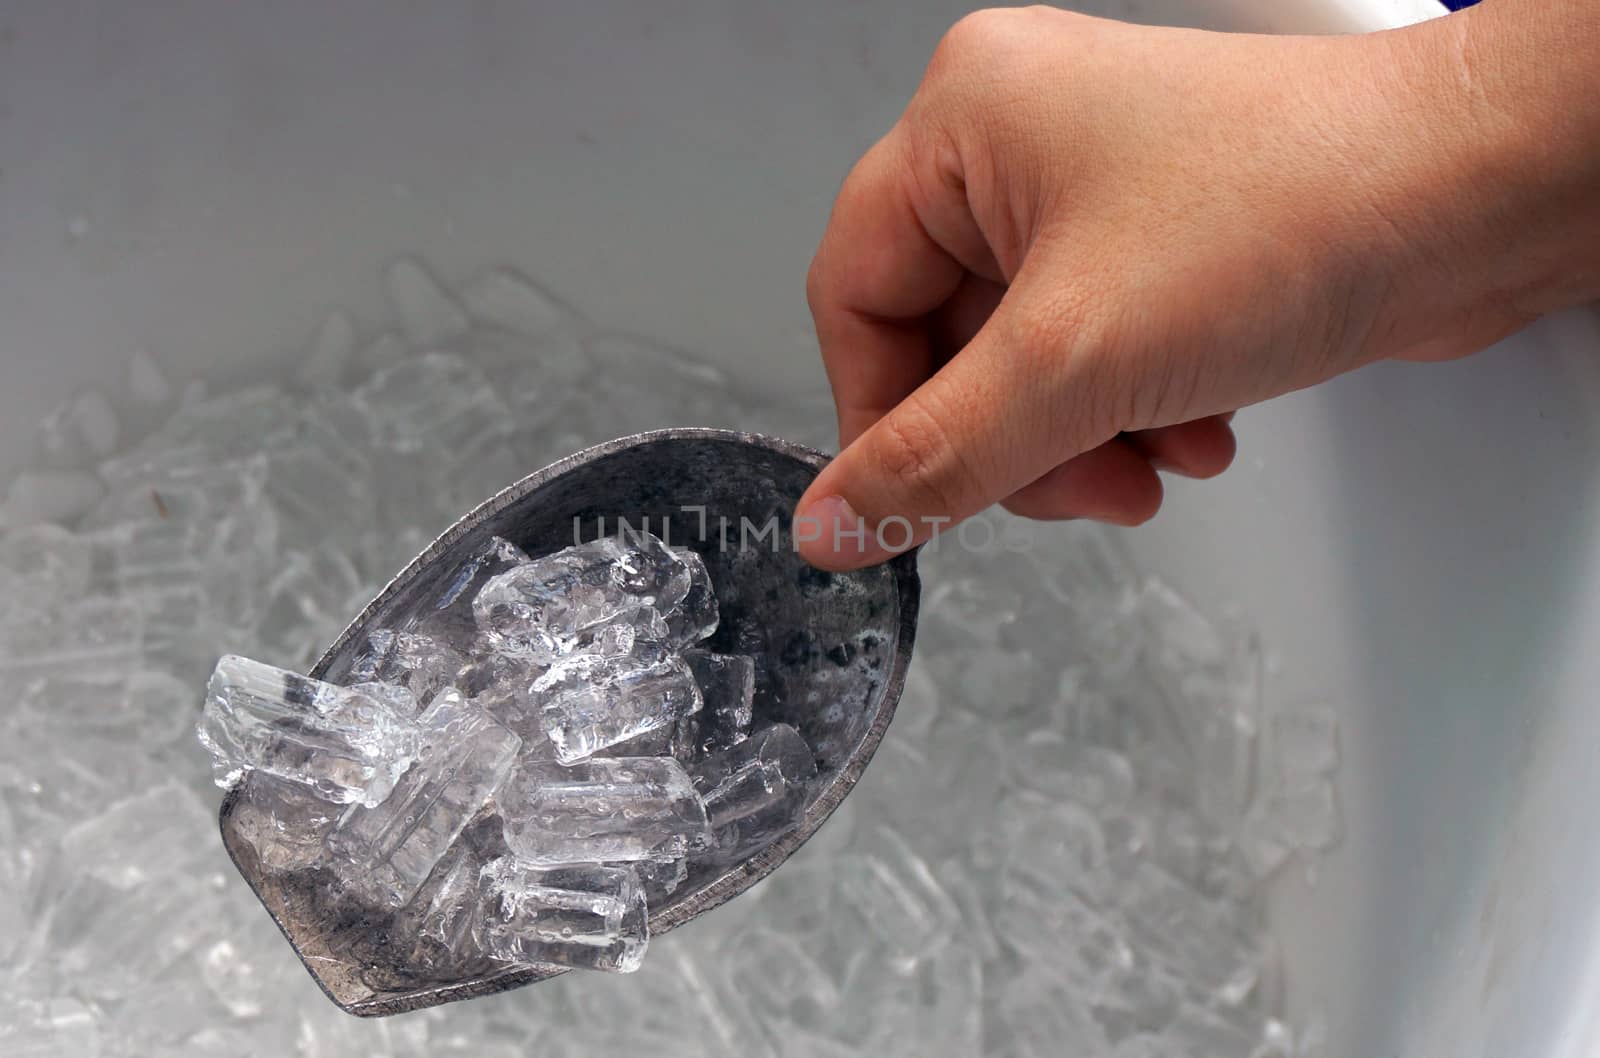 Hand is holding the ice scoop, in a cooler packed with ice.                              